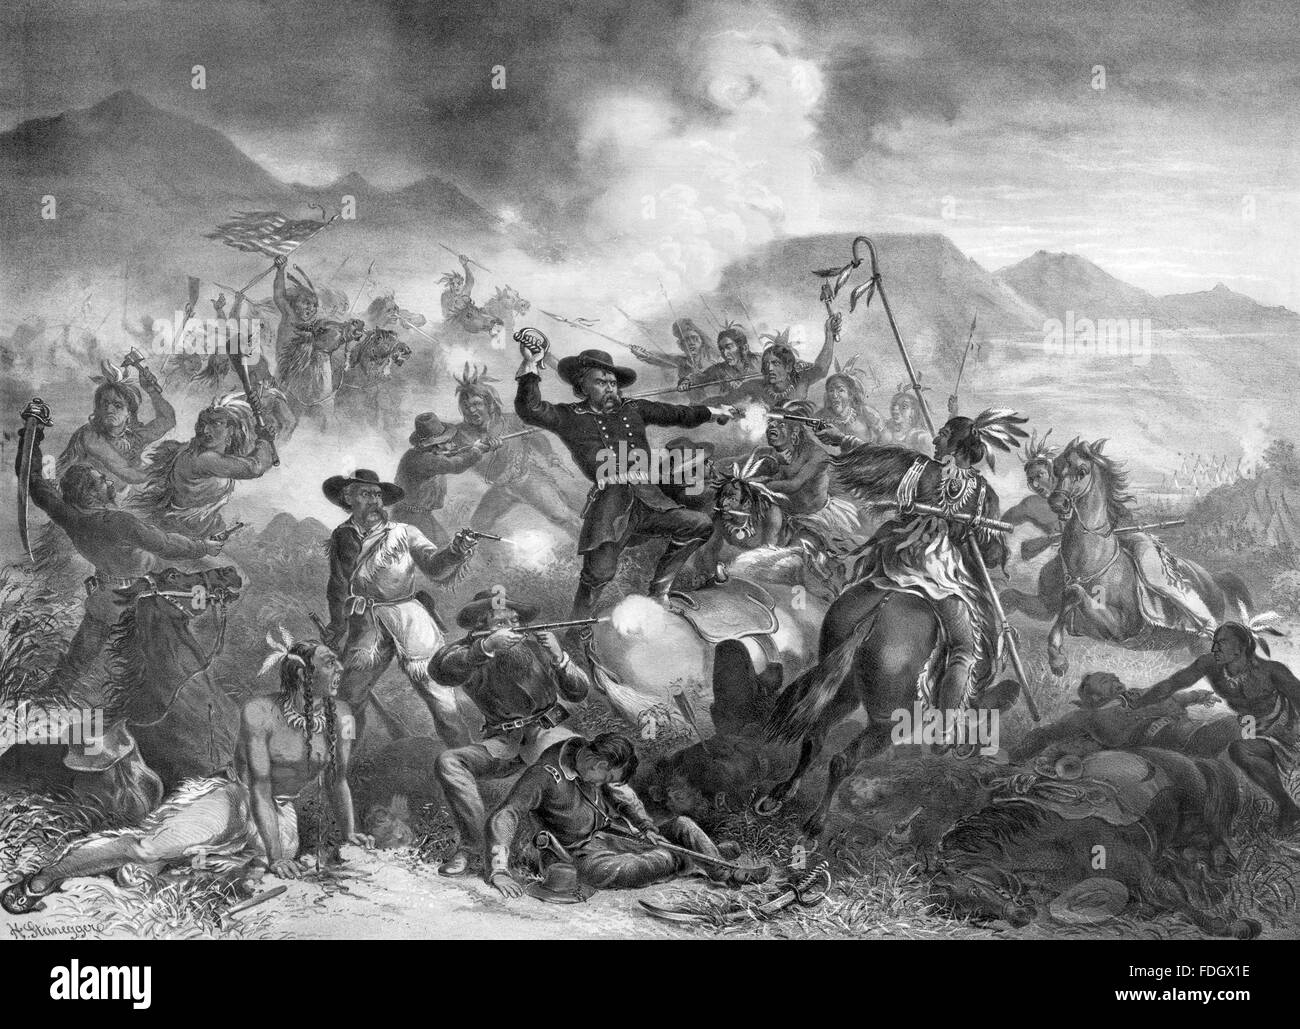 Custers Last Stand. 'General Custer's Death Struggle', Henry Steinegger's depiction of George Armstrong Custer's last stand at the Battle of Little Bighorn. Lithograph c.1878 Stock Photo